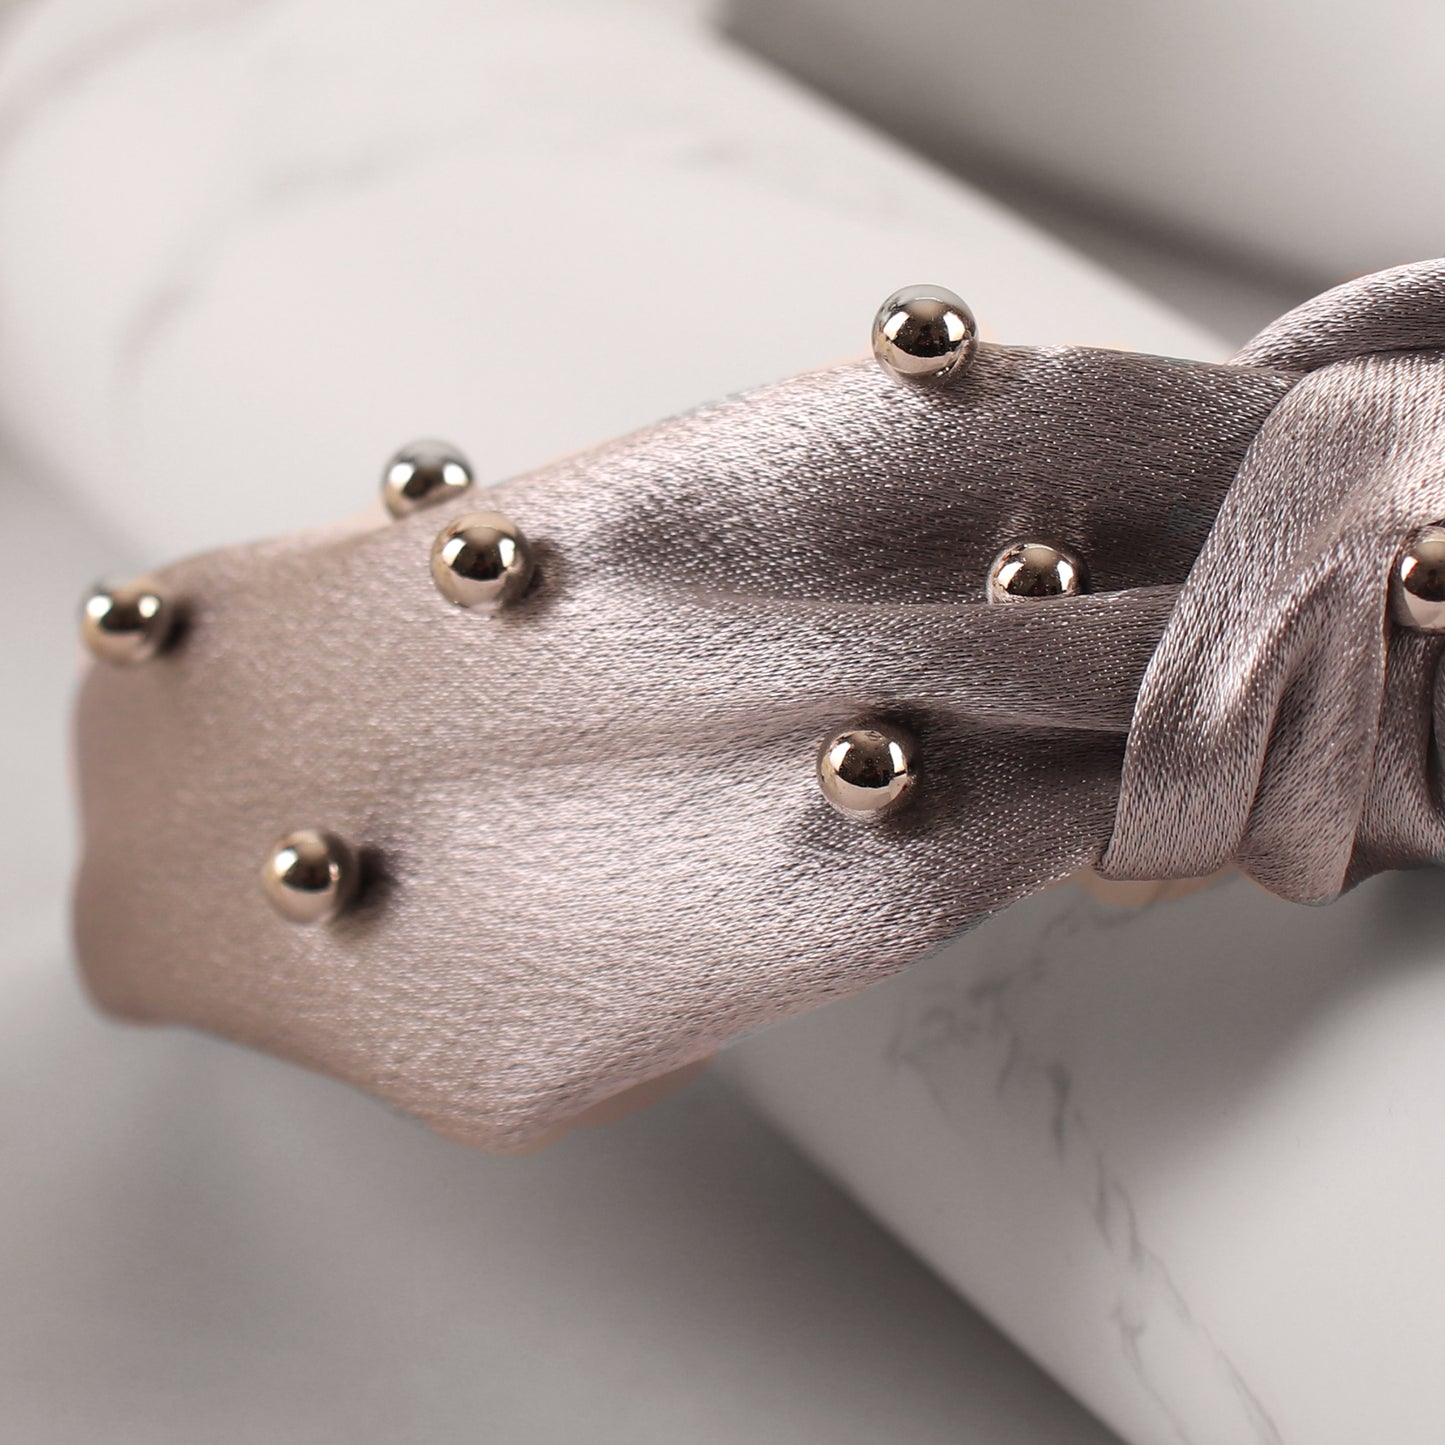 HairBand,The Hair Flair Satin Hair Band in Grey - Cippele Multi Store